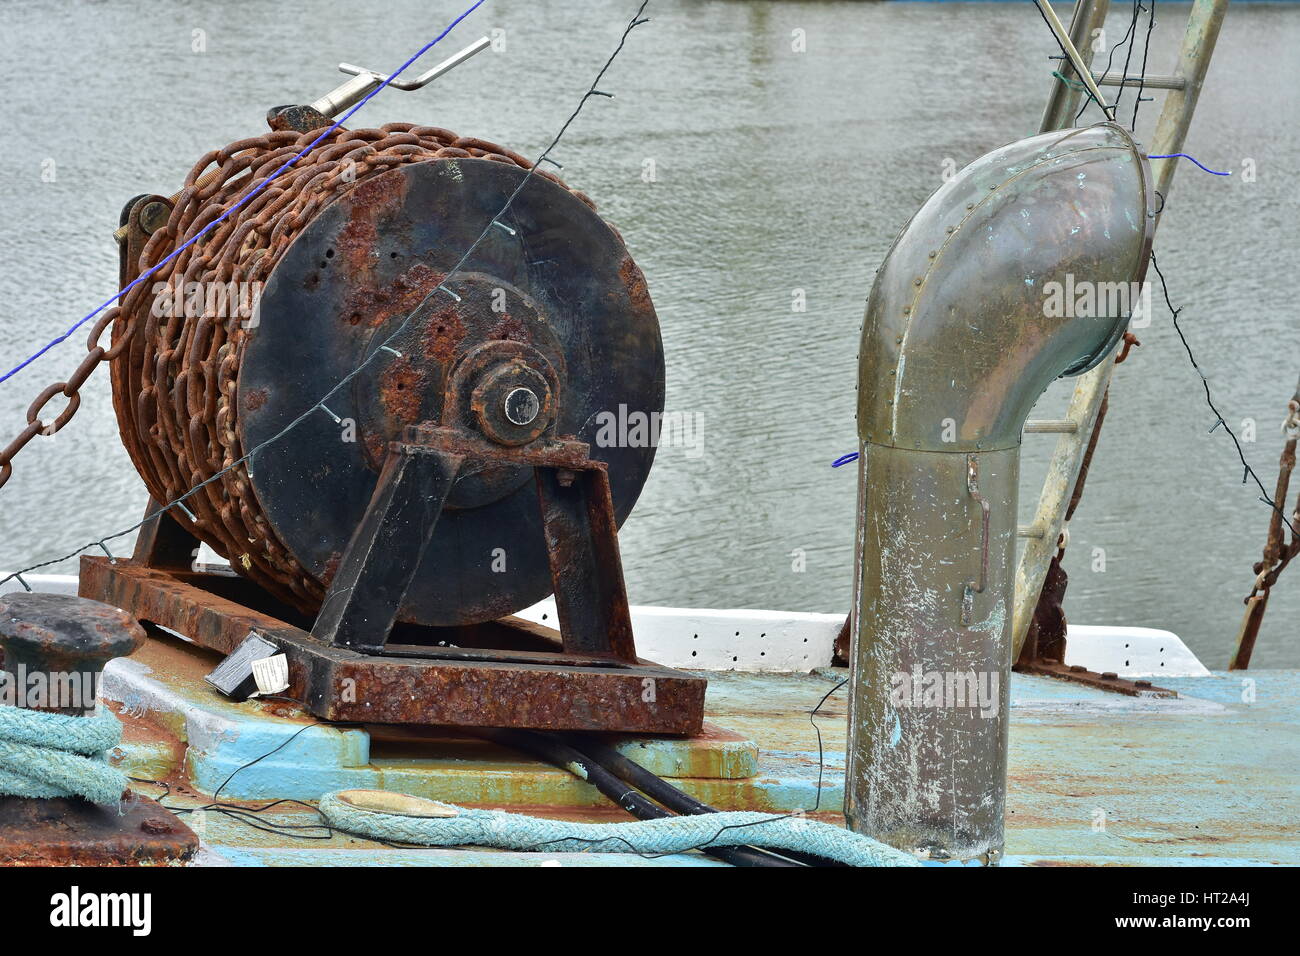 Detail of rusty chain winch on board of commercial fishing vessel. Stock Photo